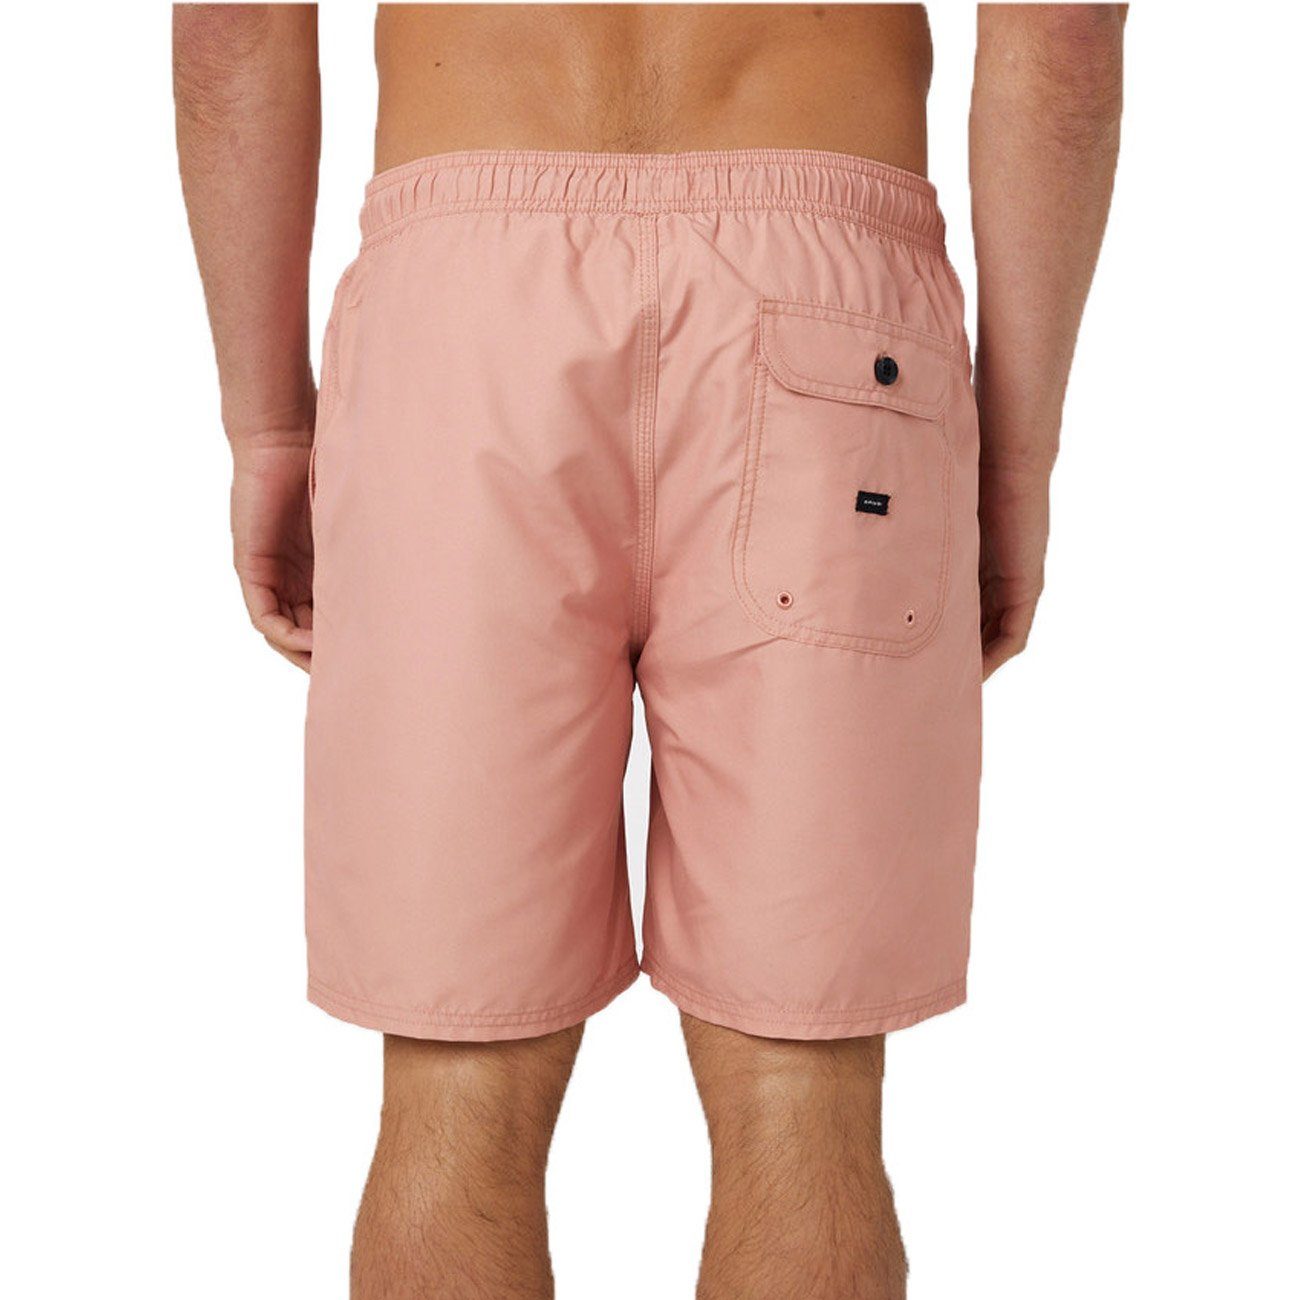 Rip Curl EASY VOLLEY LIVING dusty Badeshorts rose